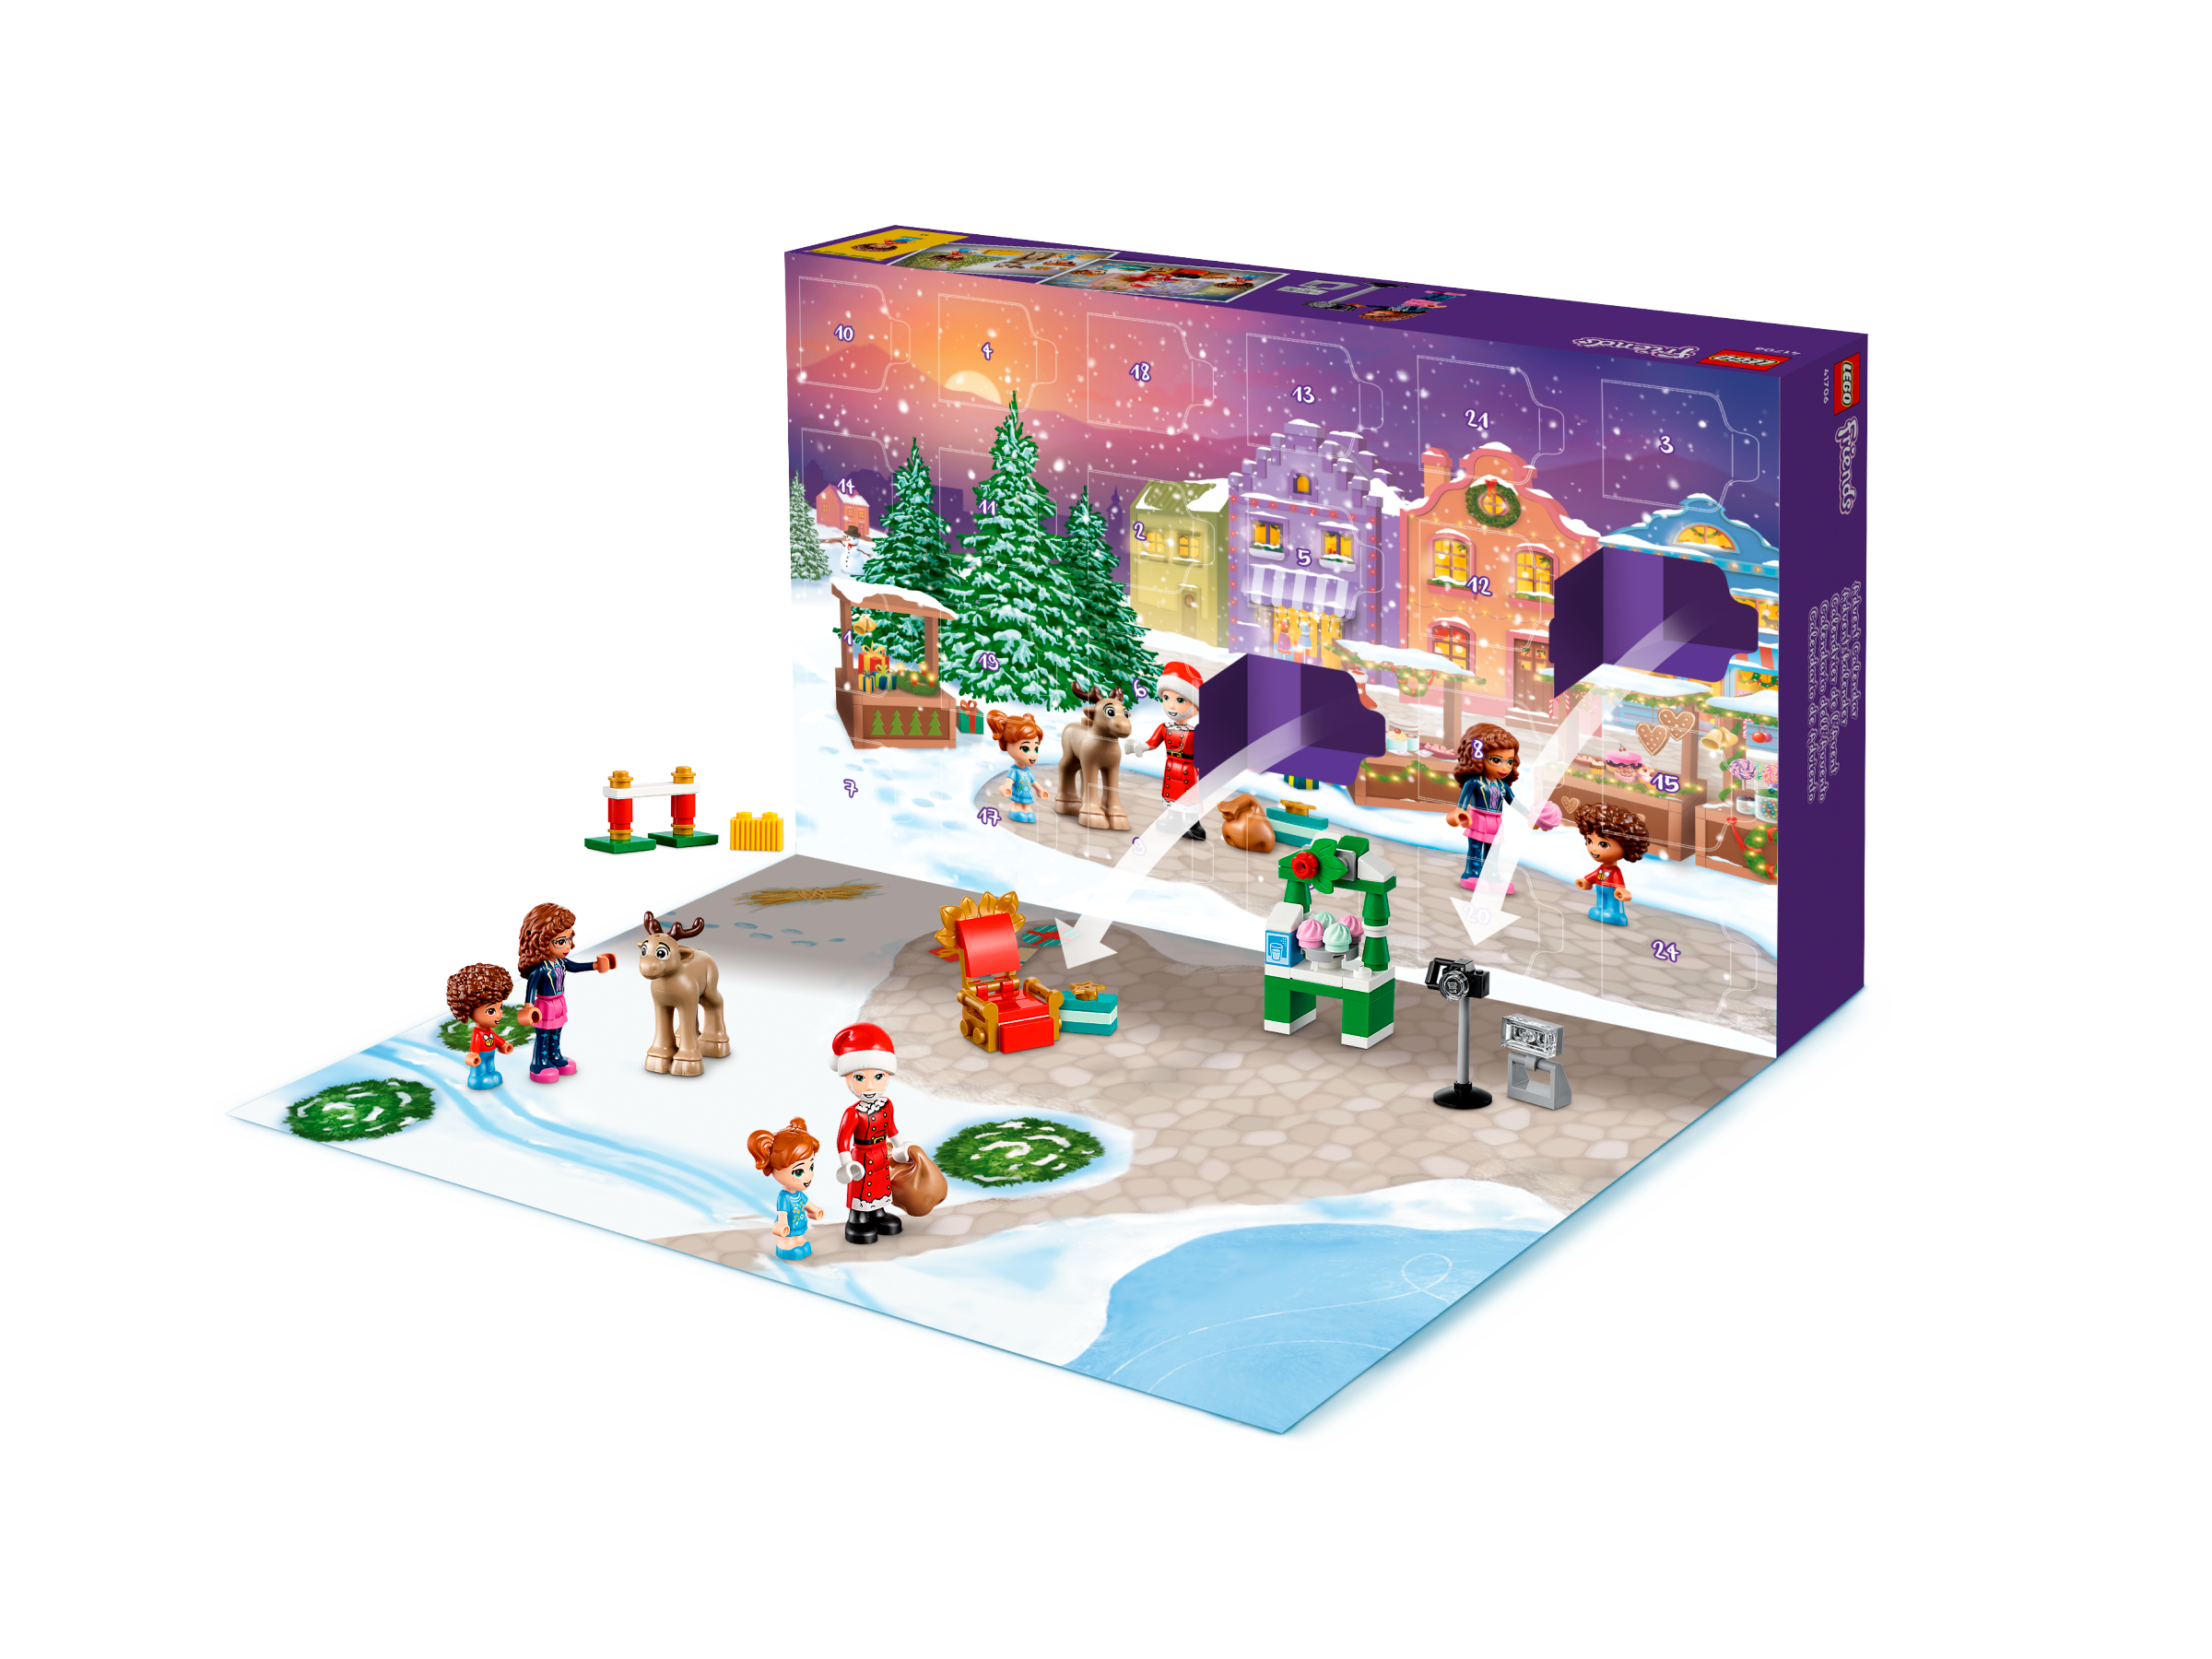 LEGO® Friends Advent Calendar 41706 | Friends | Buy online at the